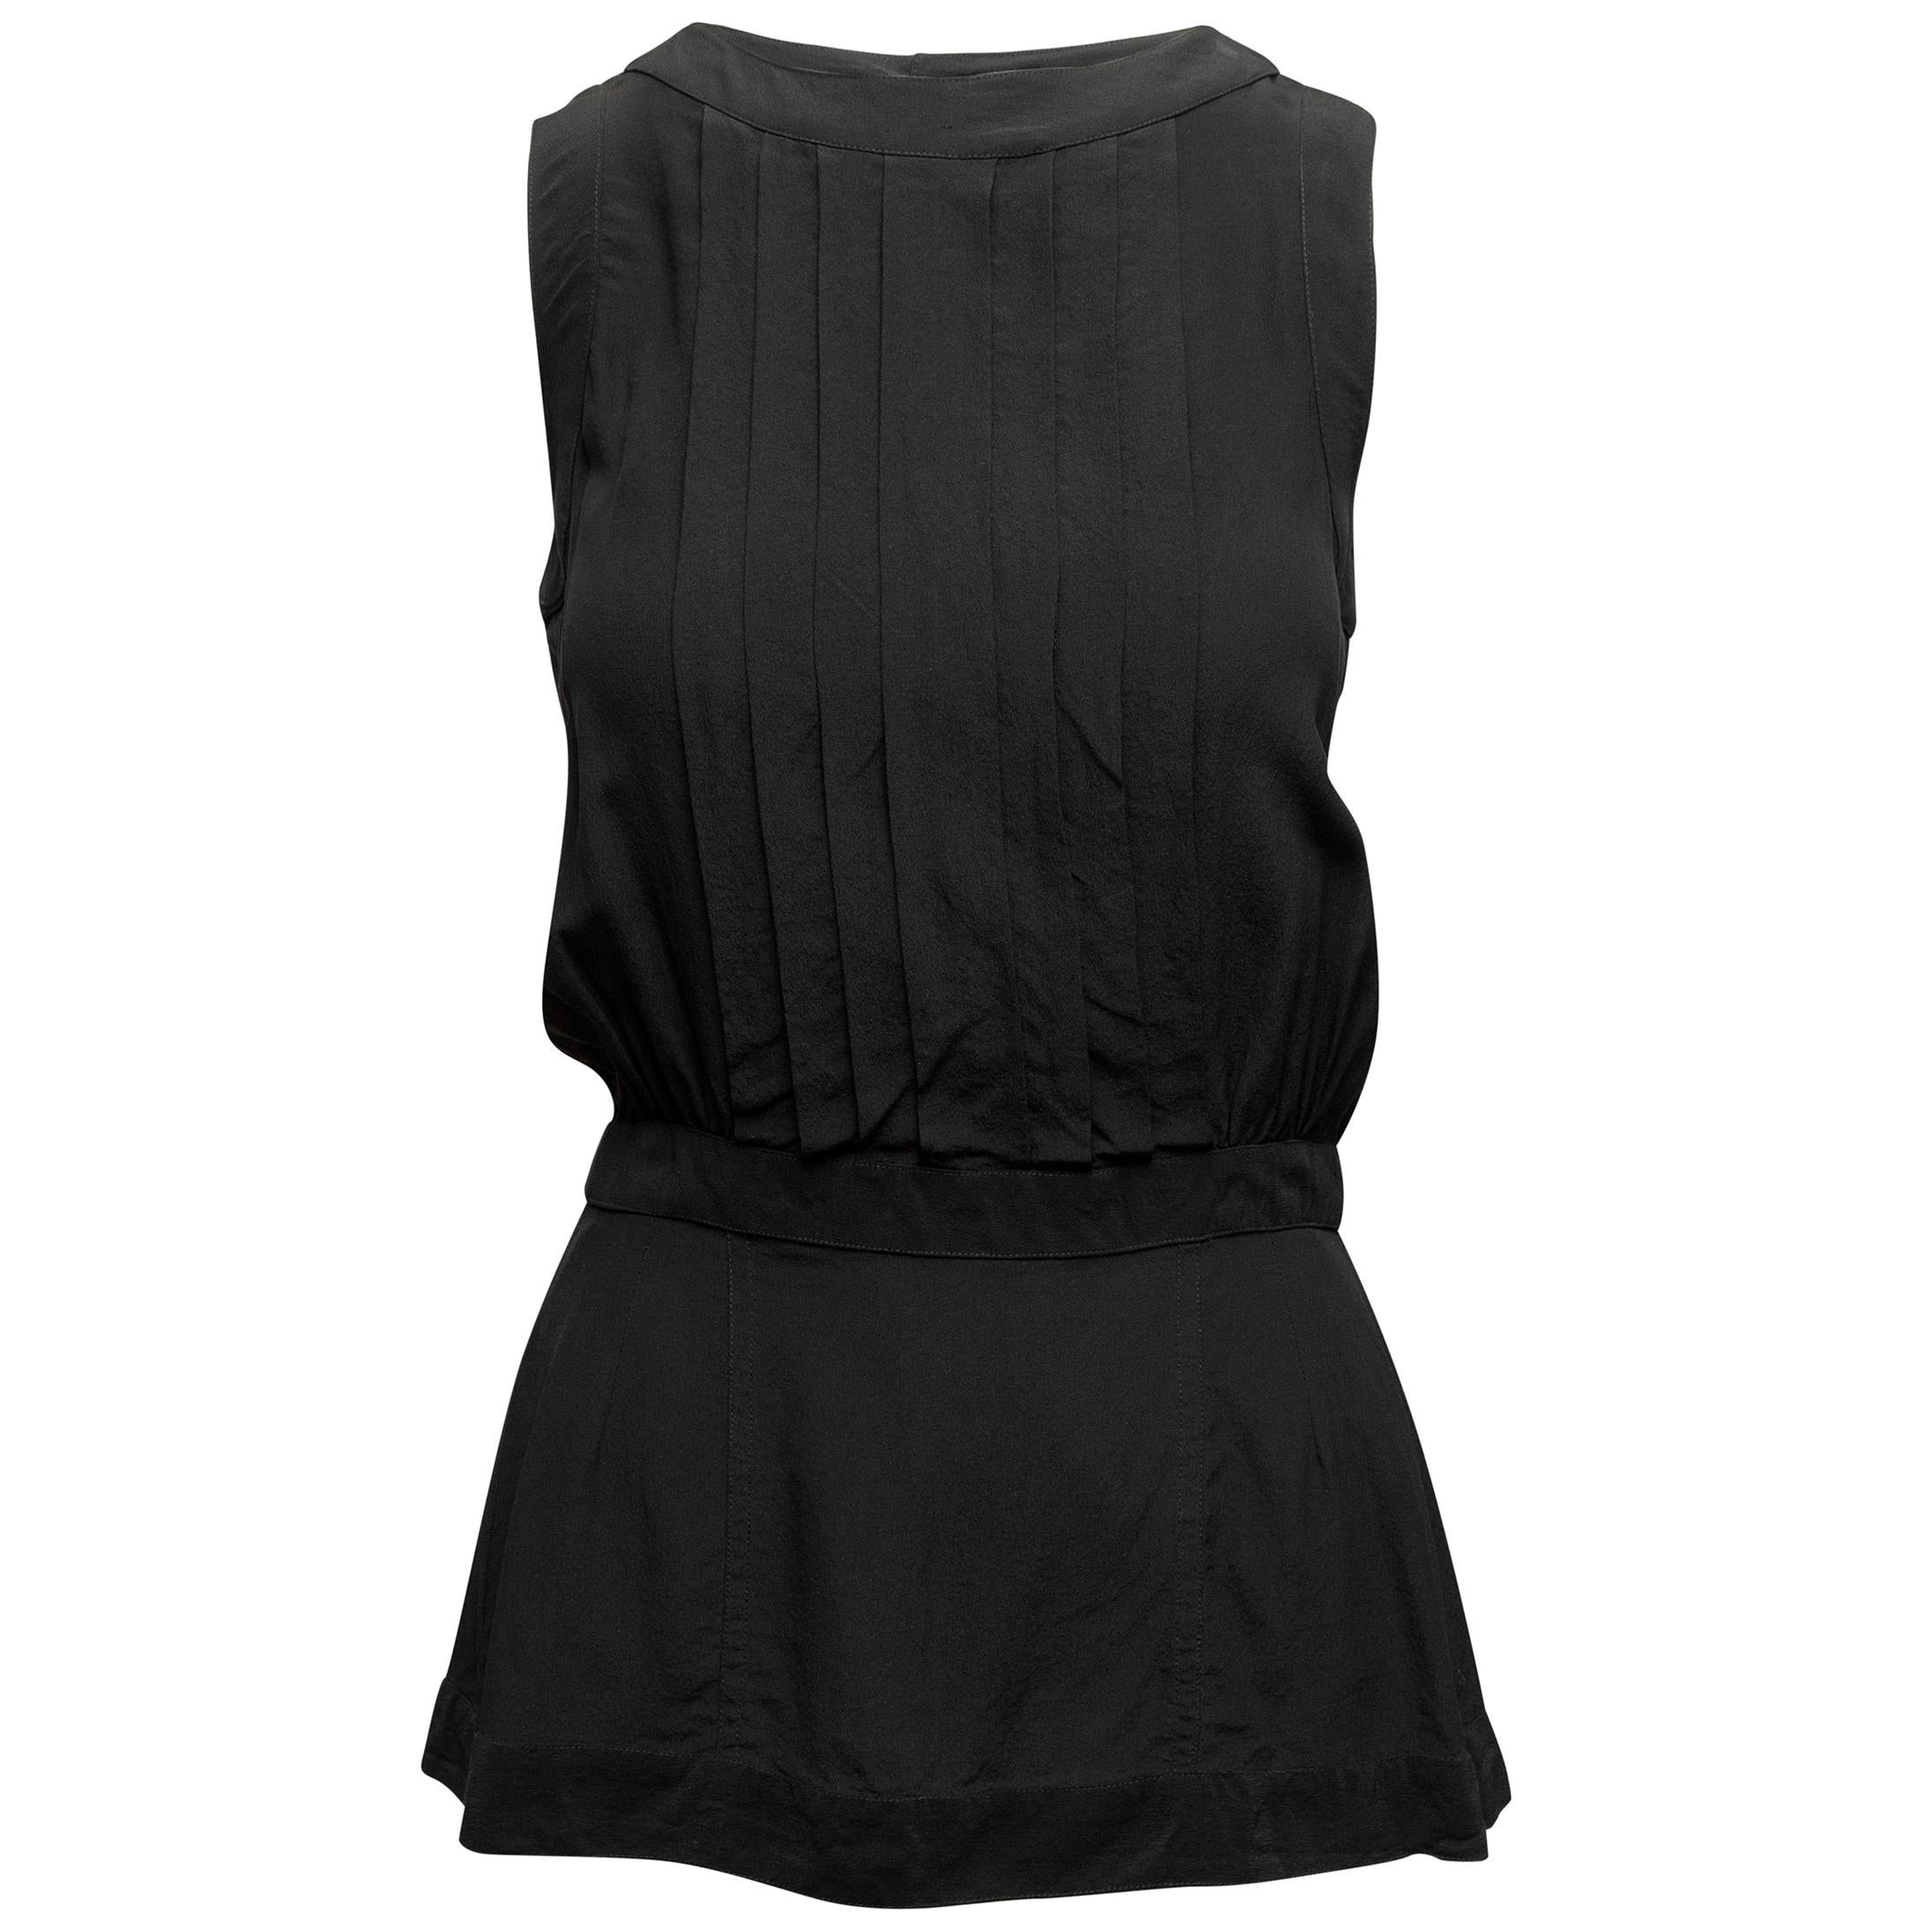 Chanel Boutique Black Sleeveless Top